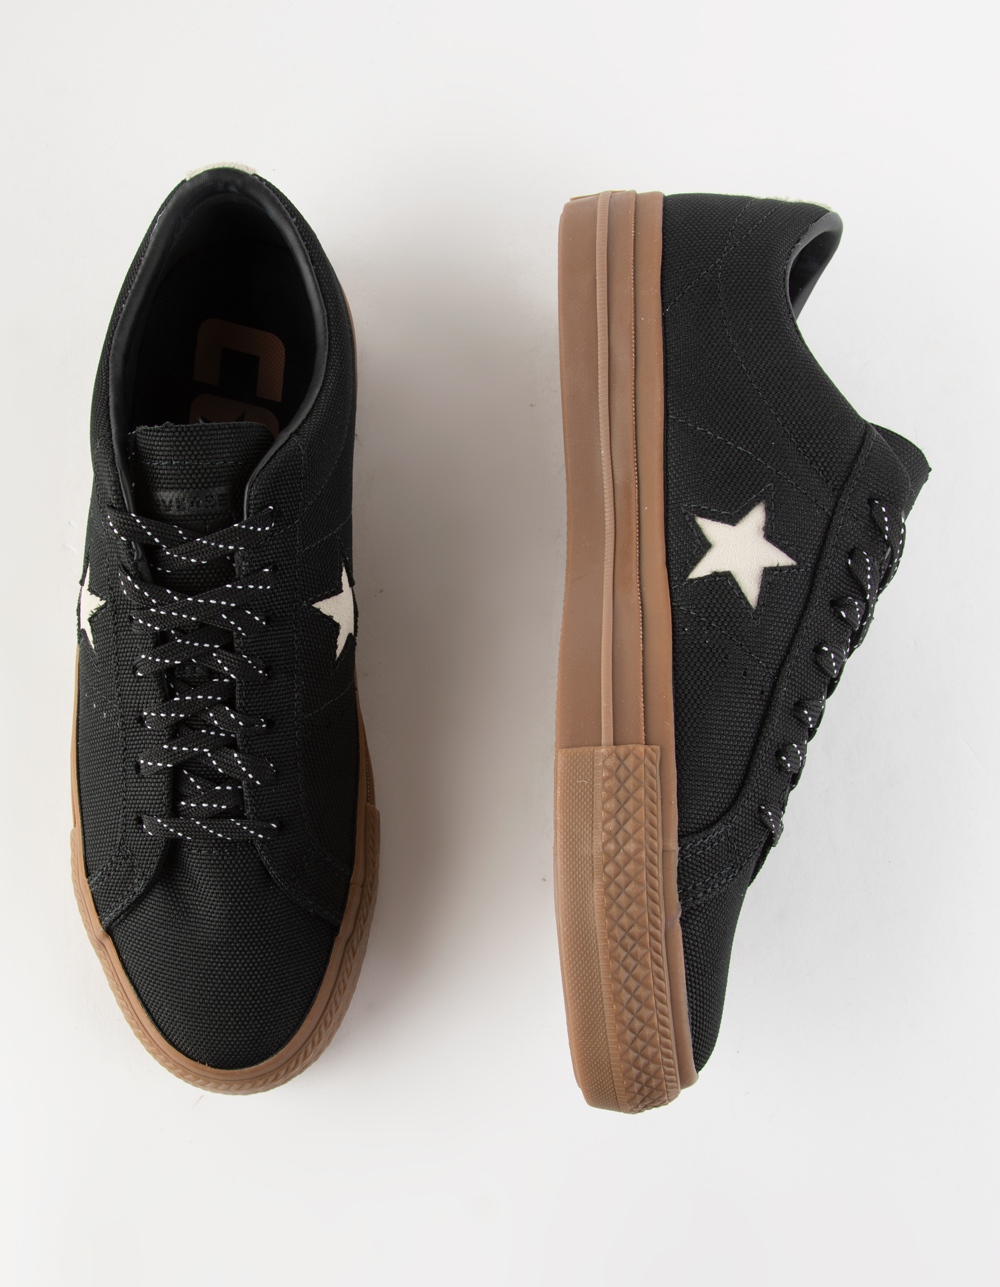 Converse One Star Pro Corduroy Shoes